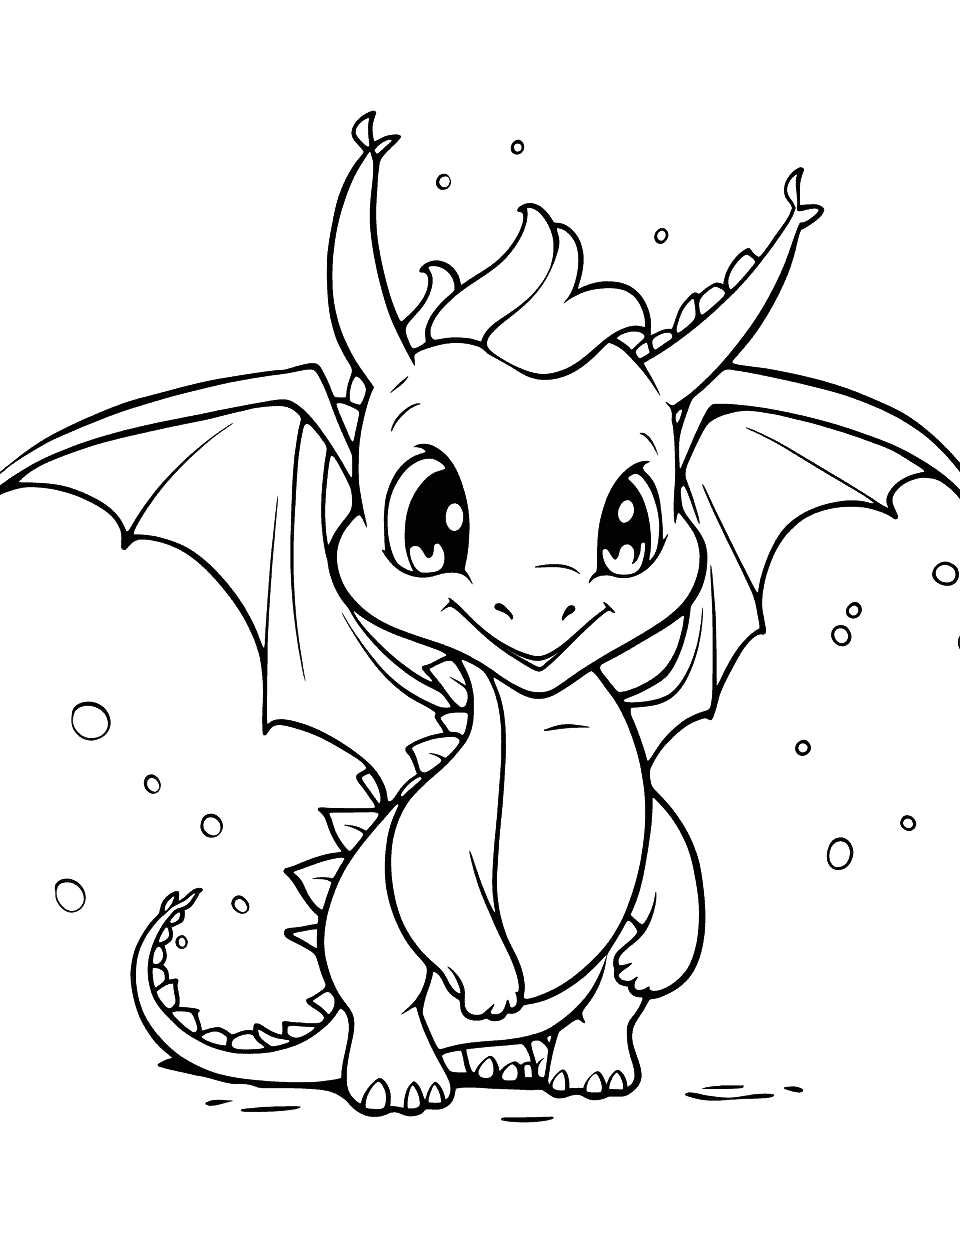 Icewing Baby Dragon Coloring Page - A cute Icewing baby dragon, playing with snowflakes.